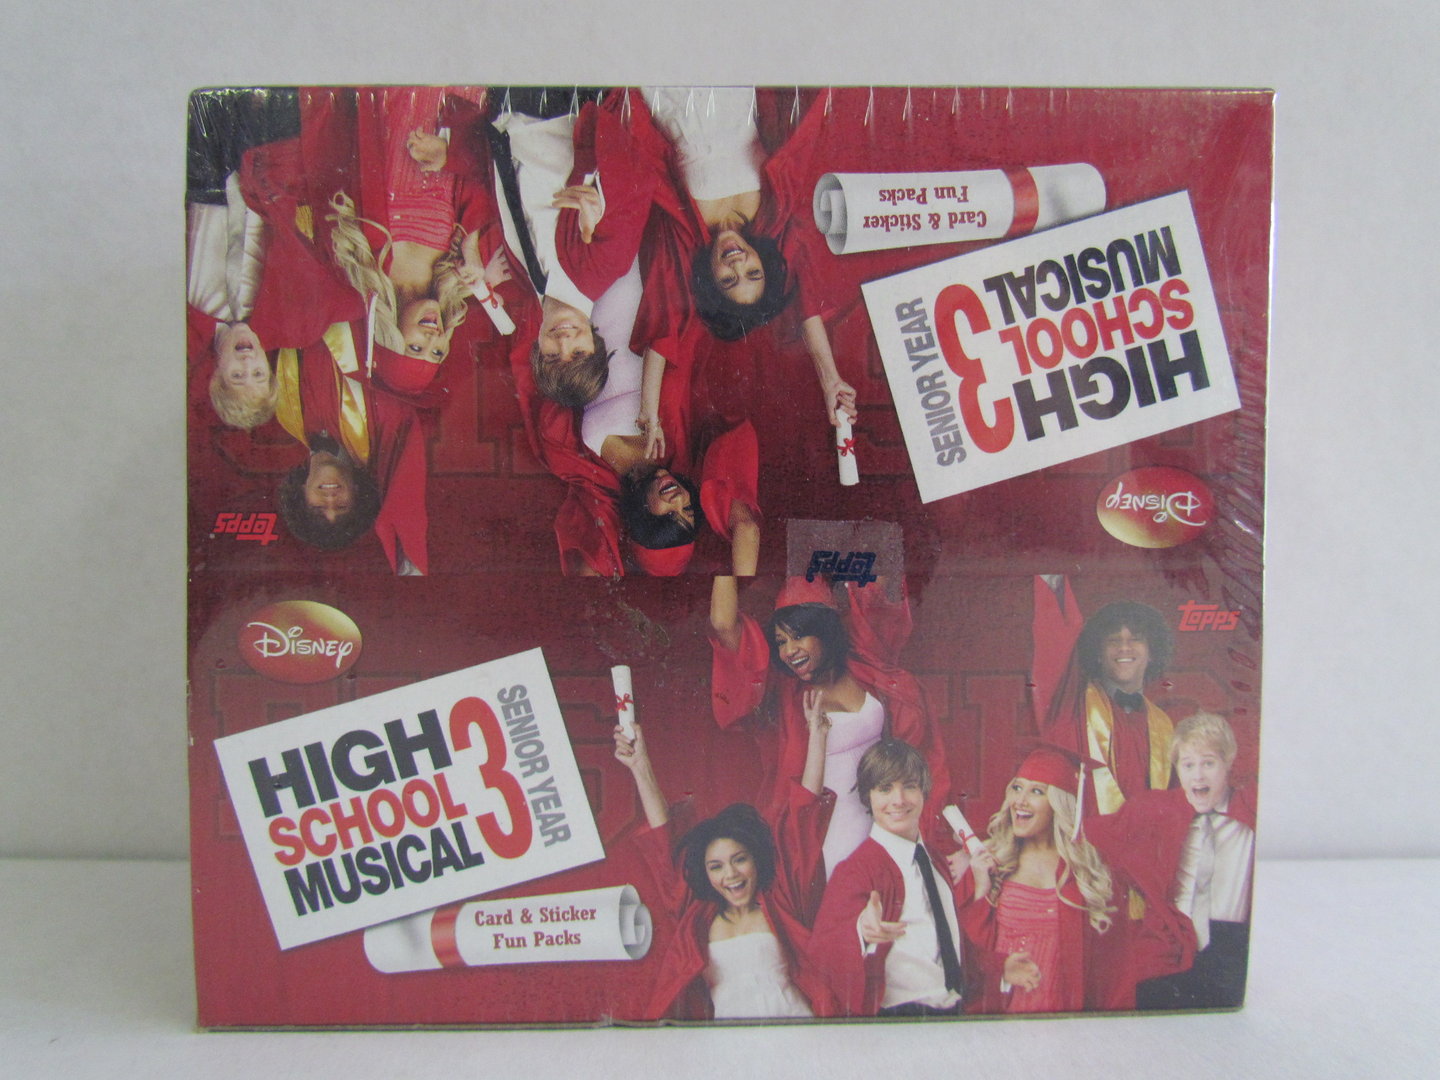 2 X TOPPS TRADING CARDS HIGH SCHOOL MUSICAL 3 GAME CARDS X 50 SEALED PACKS = 100